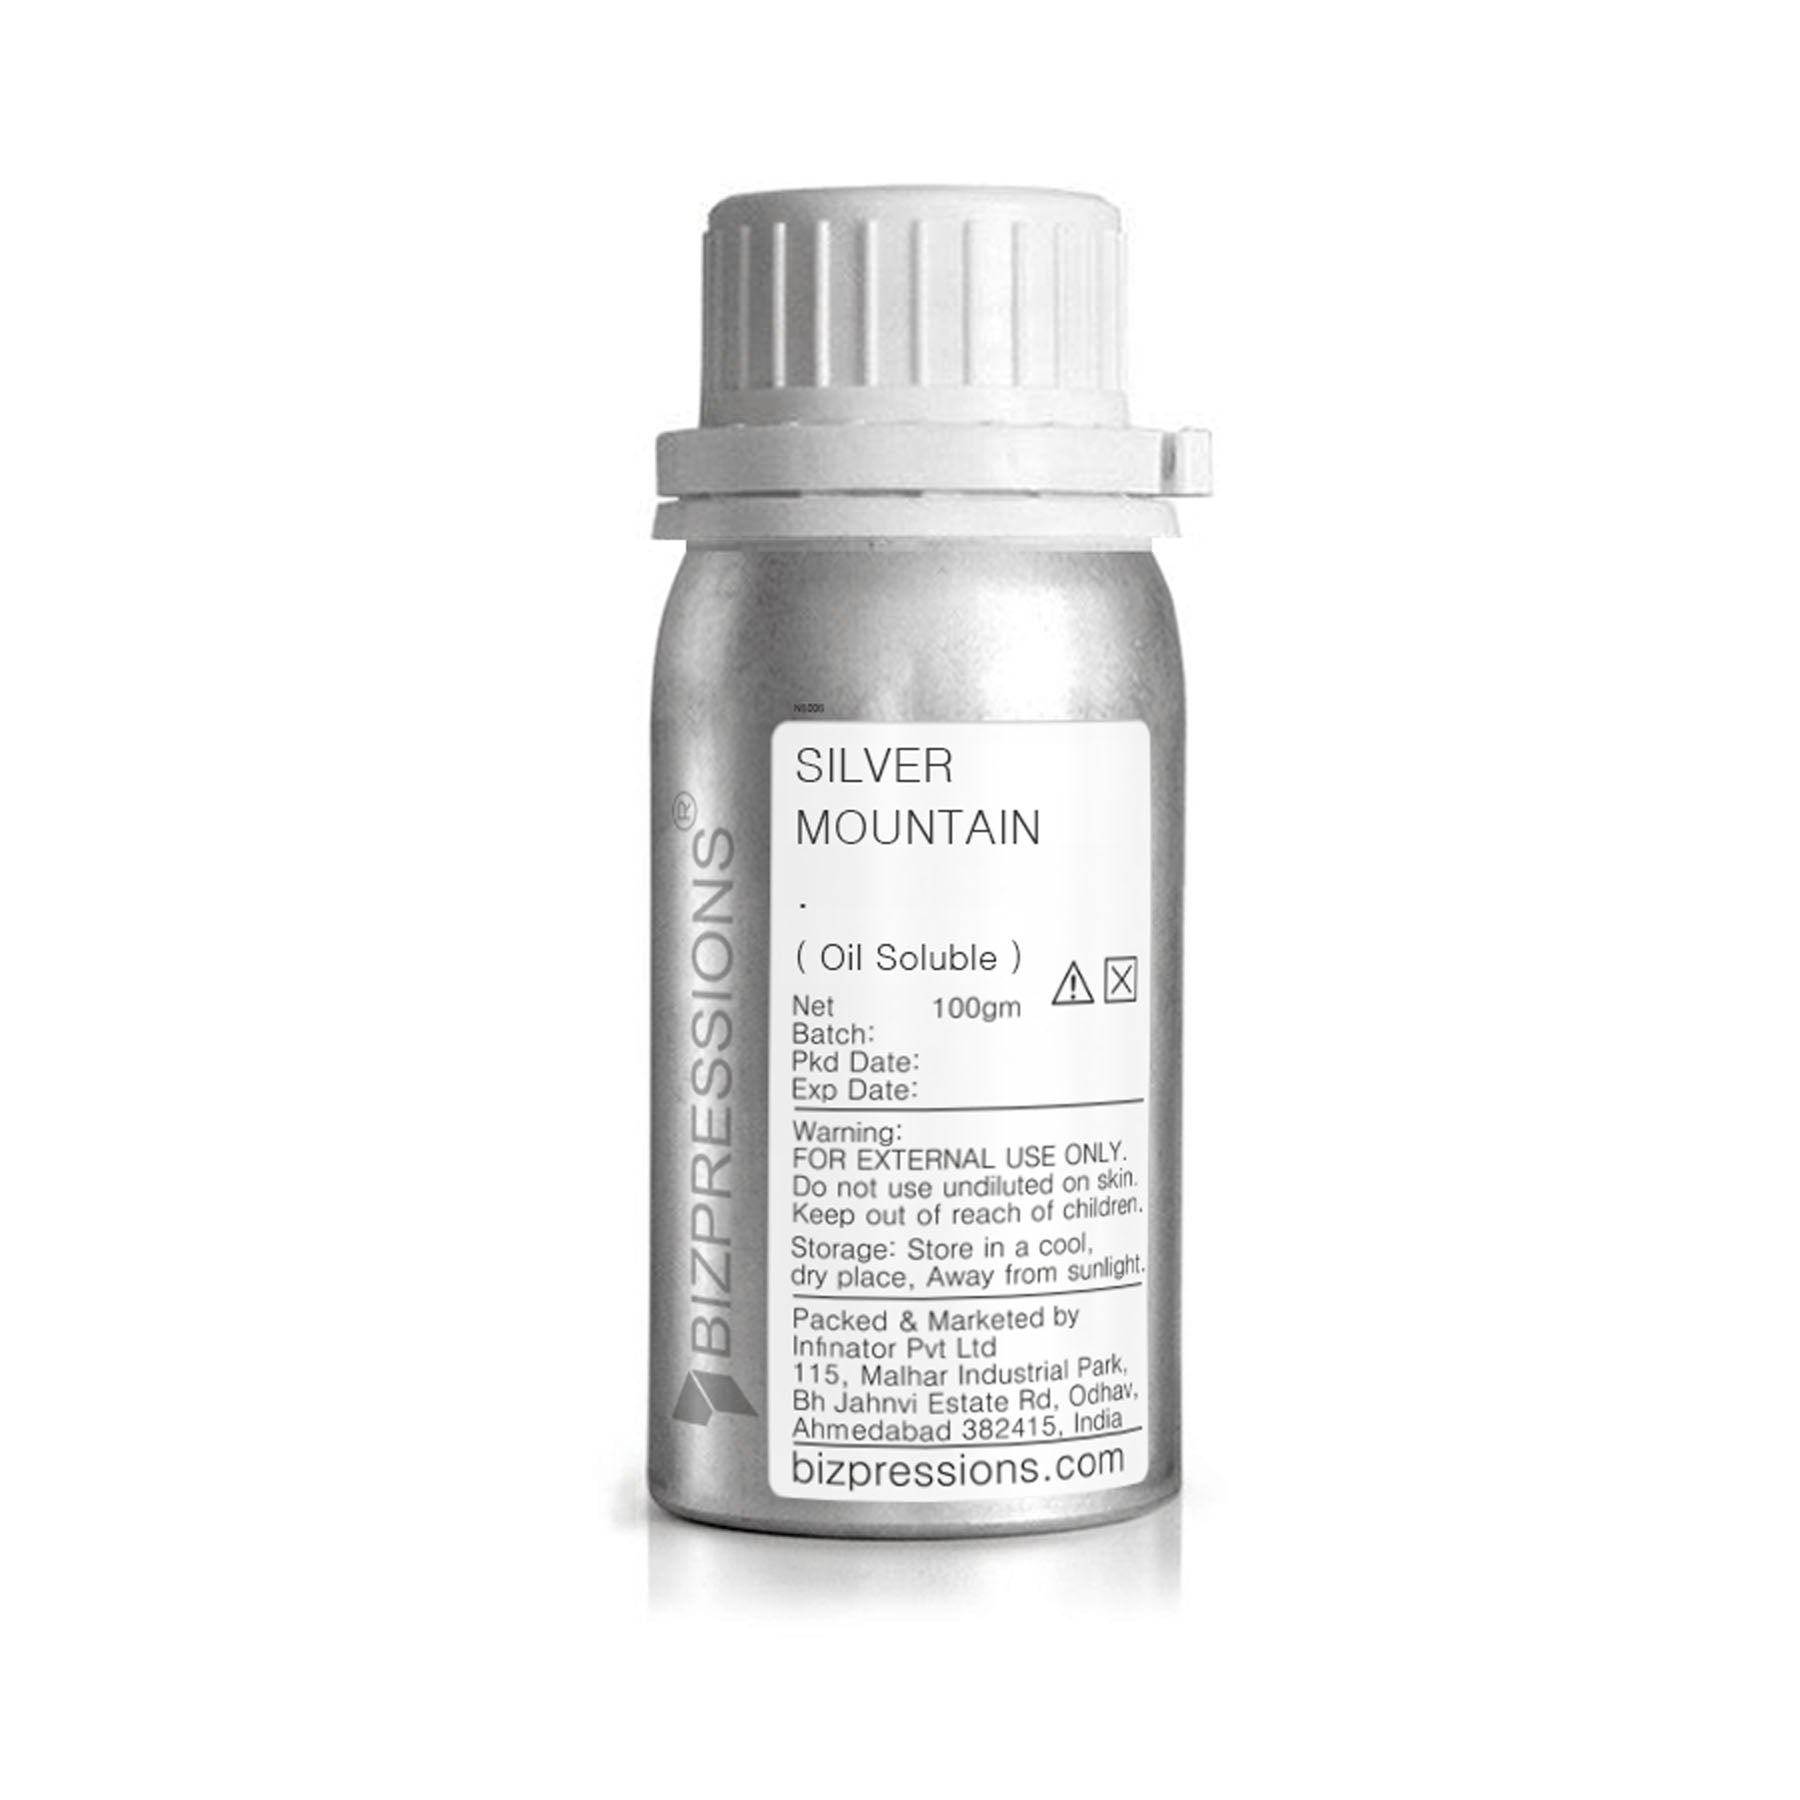 SILVER MOUNTAIN - Fragrance ( Oil Soluble ) - 100 gm